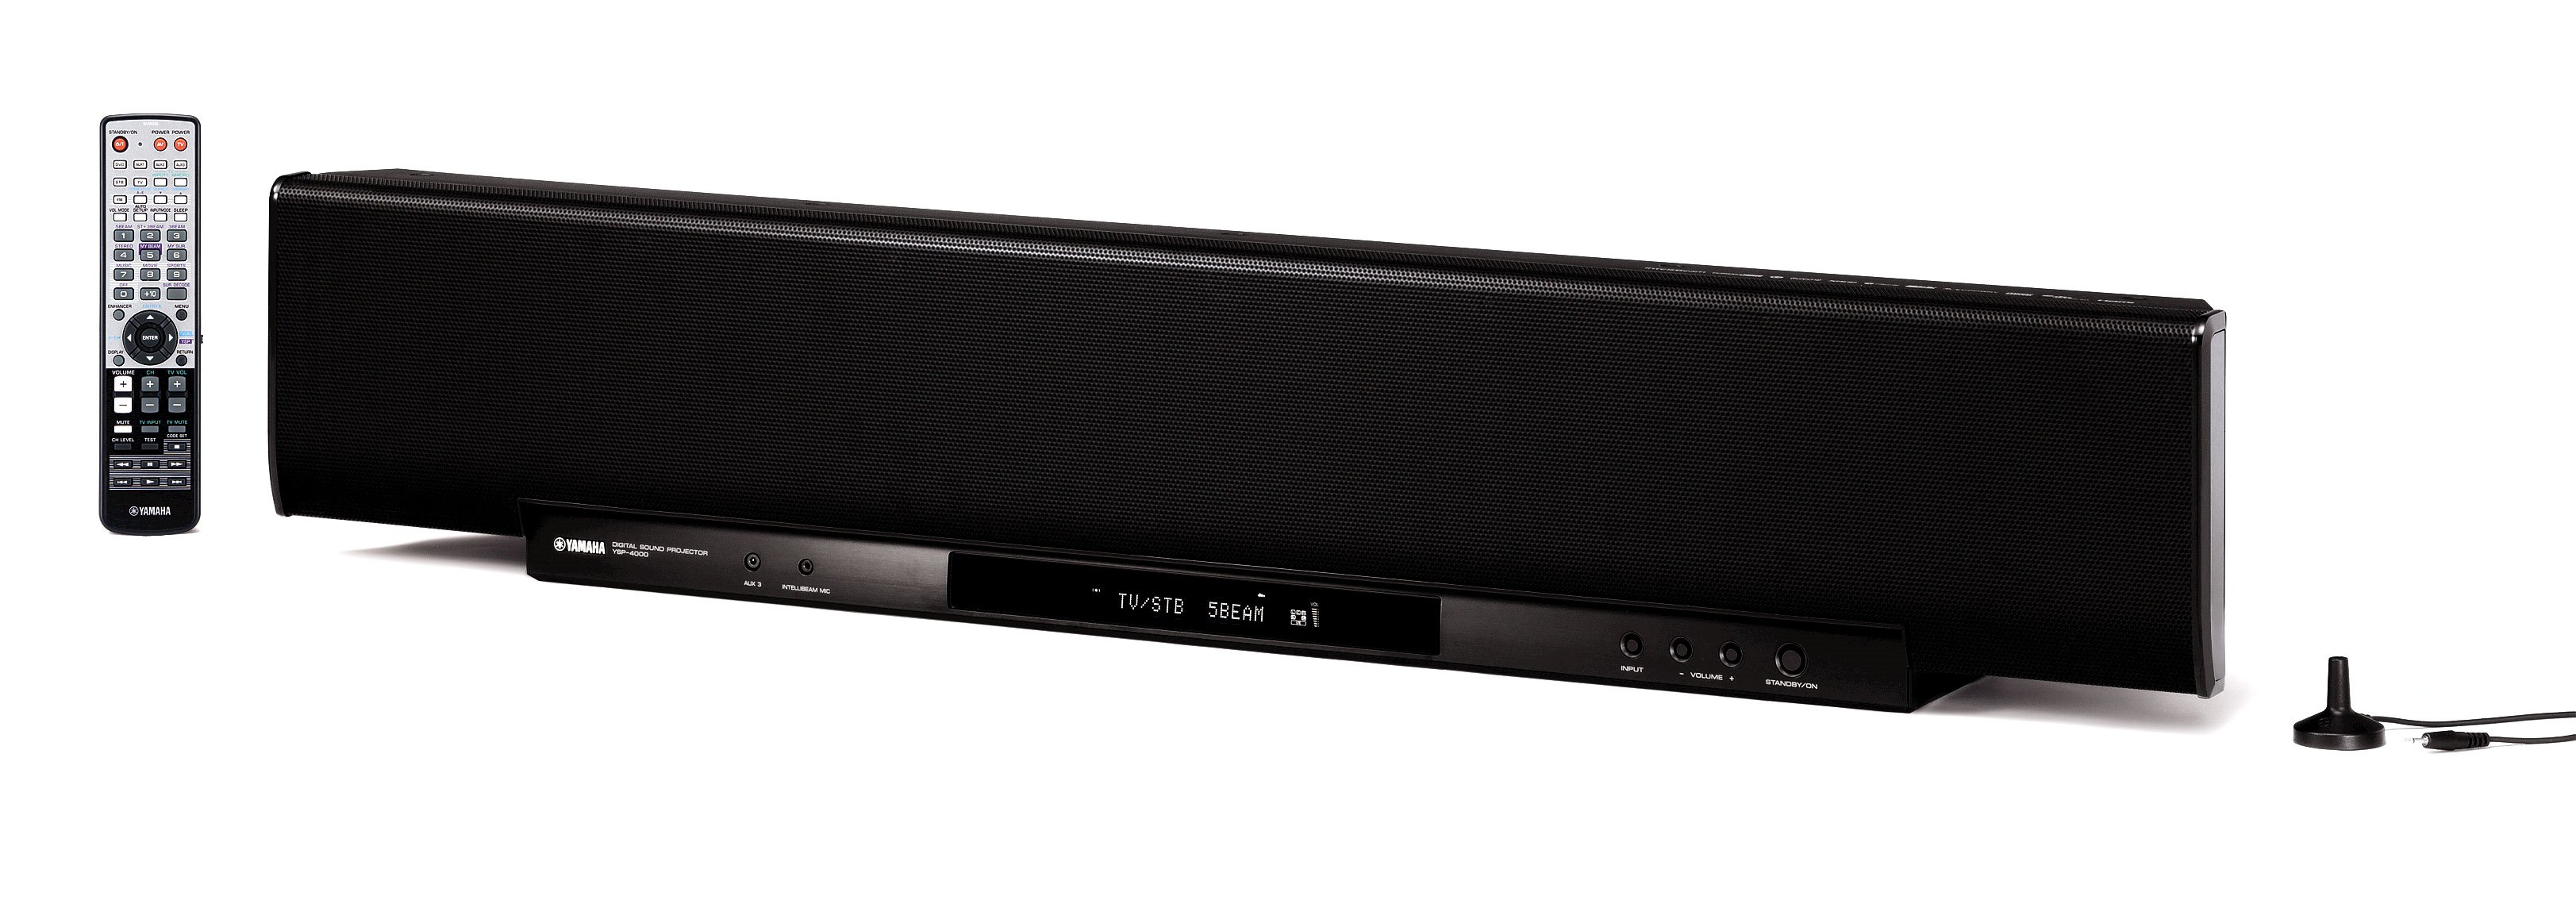 YSP-4000 - Overview - Sound Bars - Audio & Visual - Products